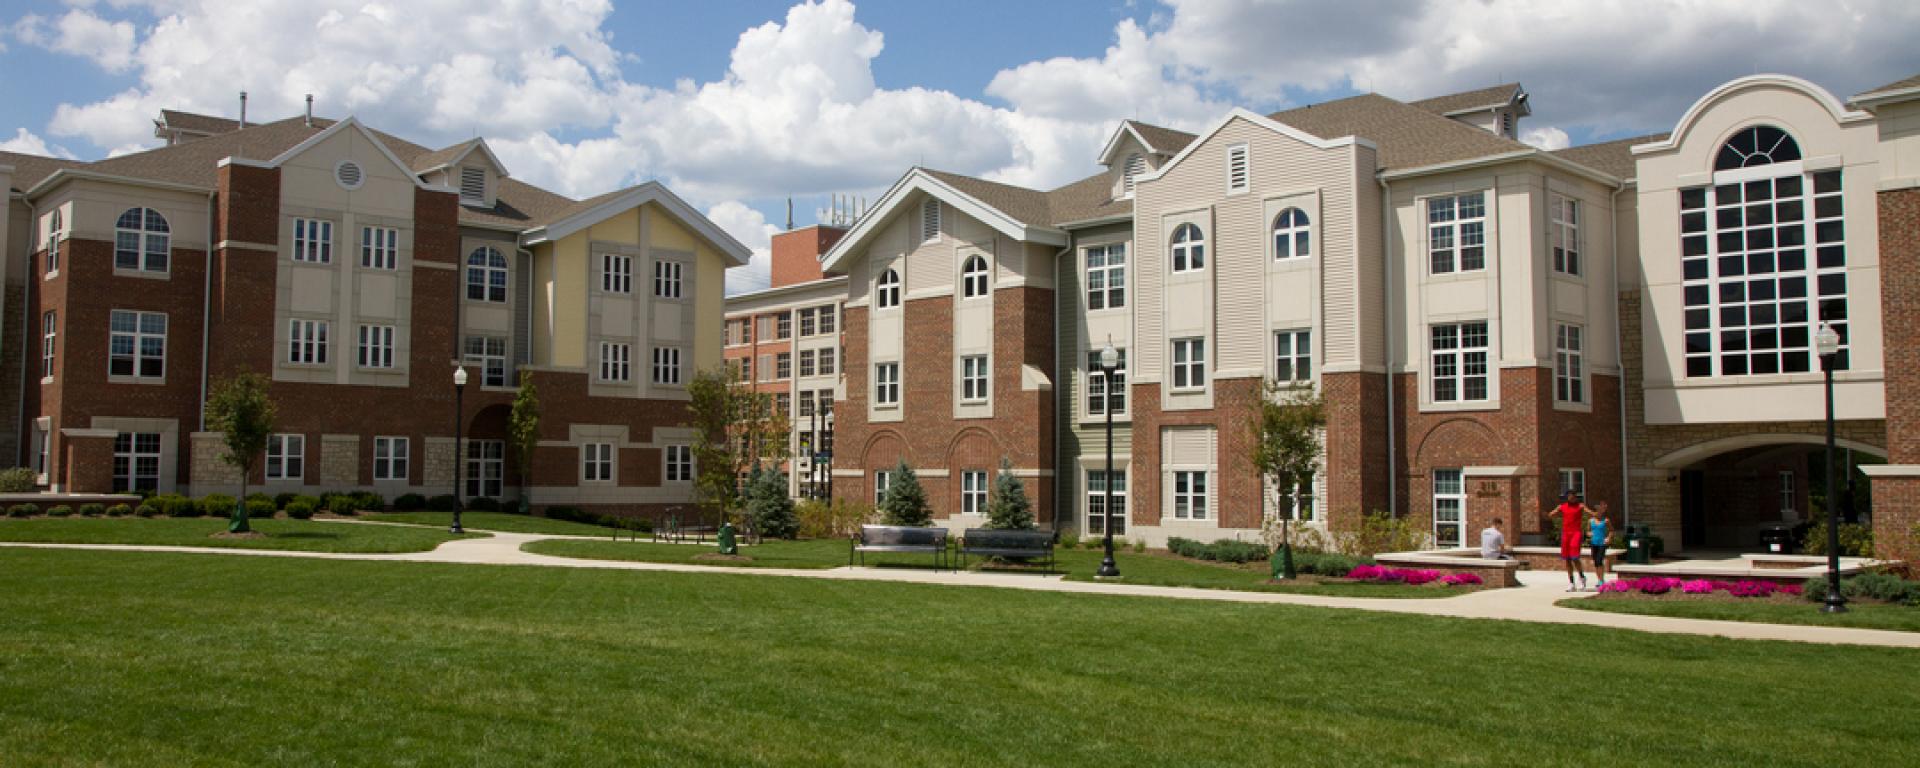 University of Dayton Caldwell and Brown Apartments